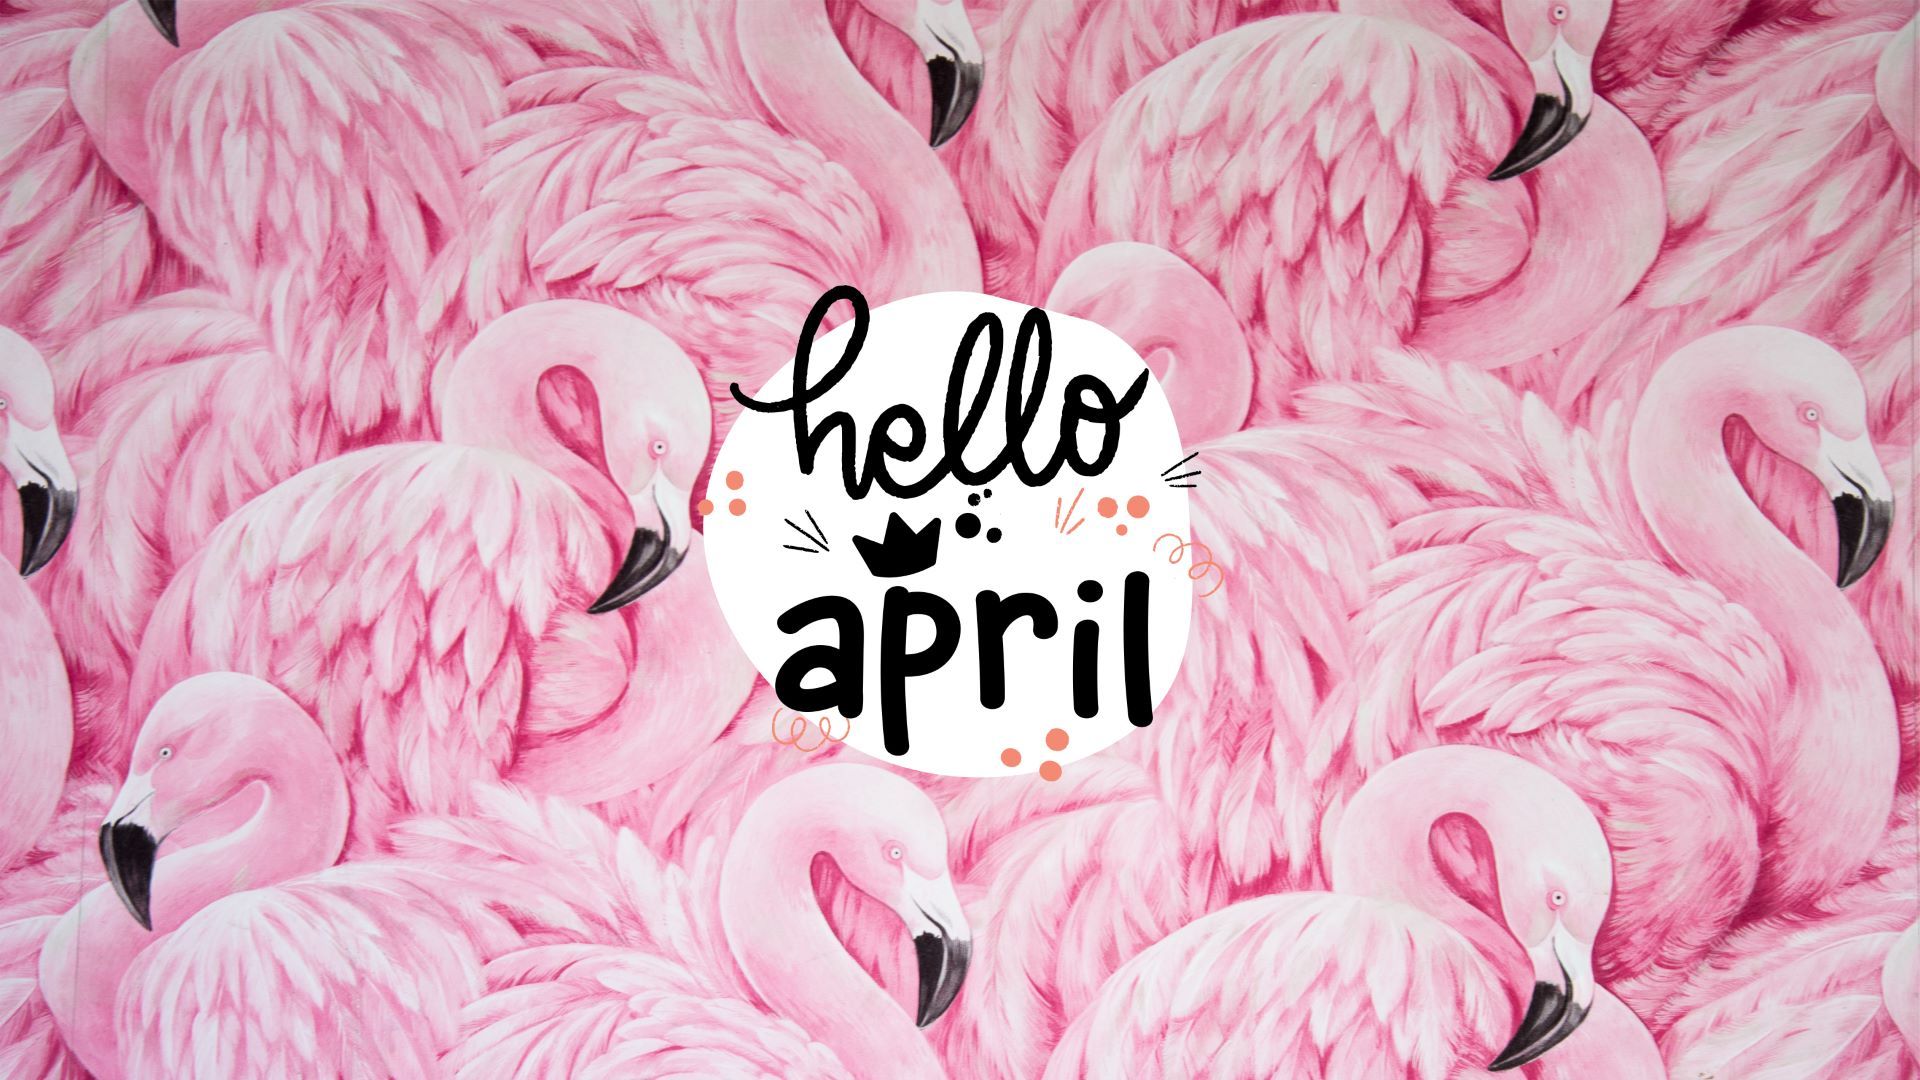 Flamingo wallpaper for April with the words hello April in the middle - Flamingo, April